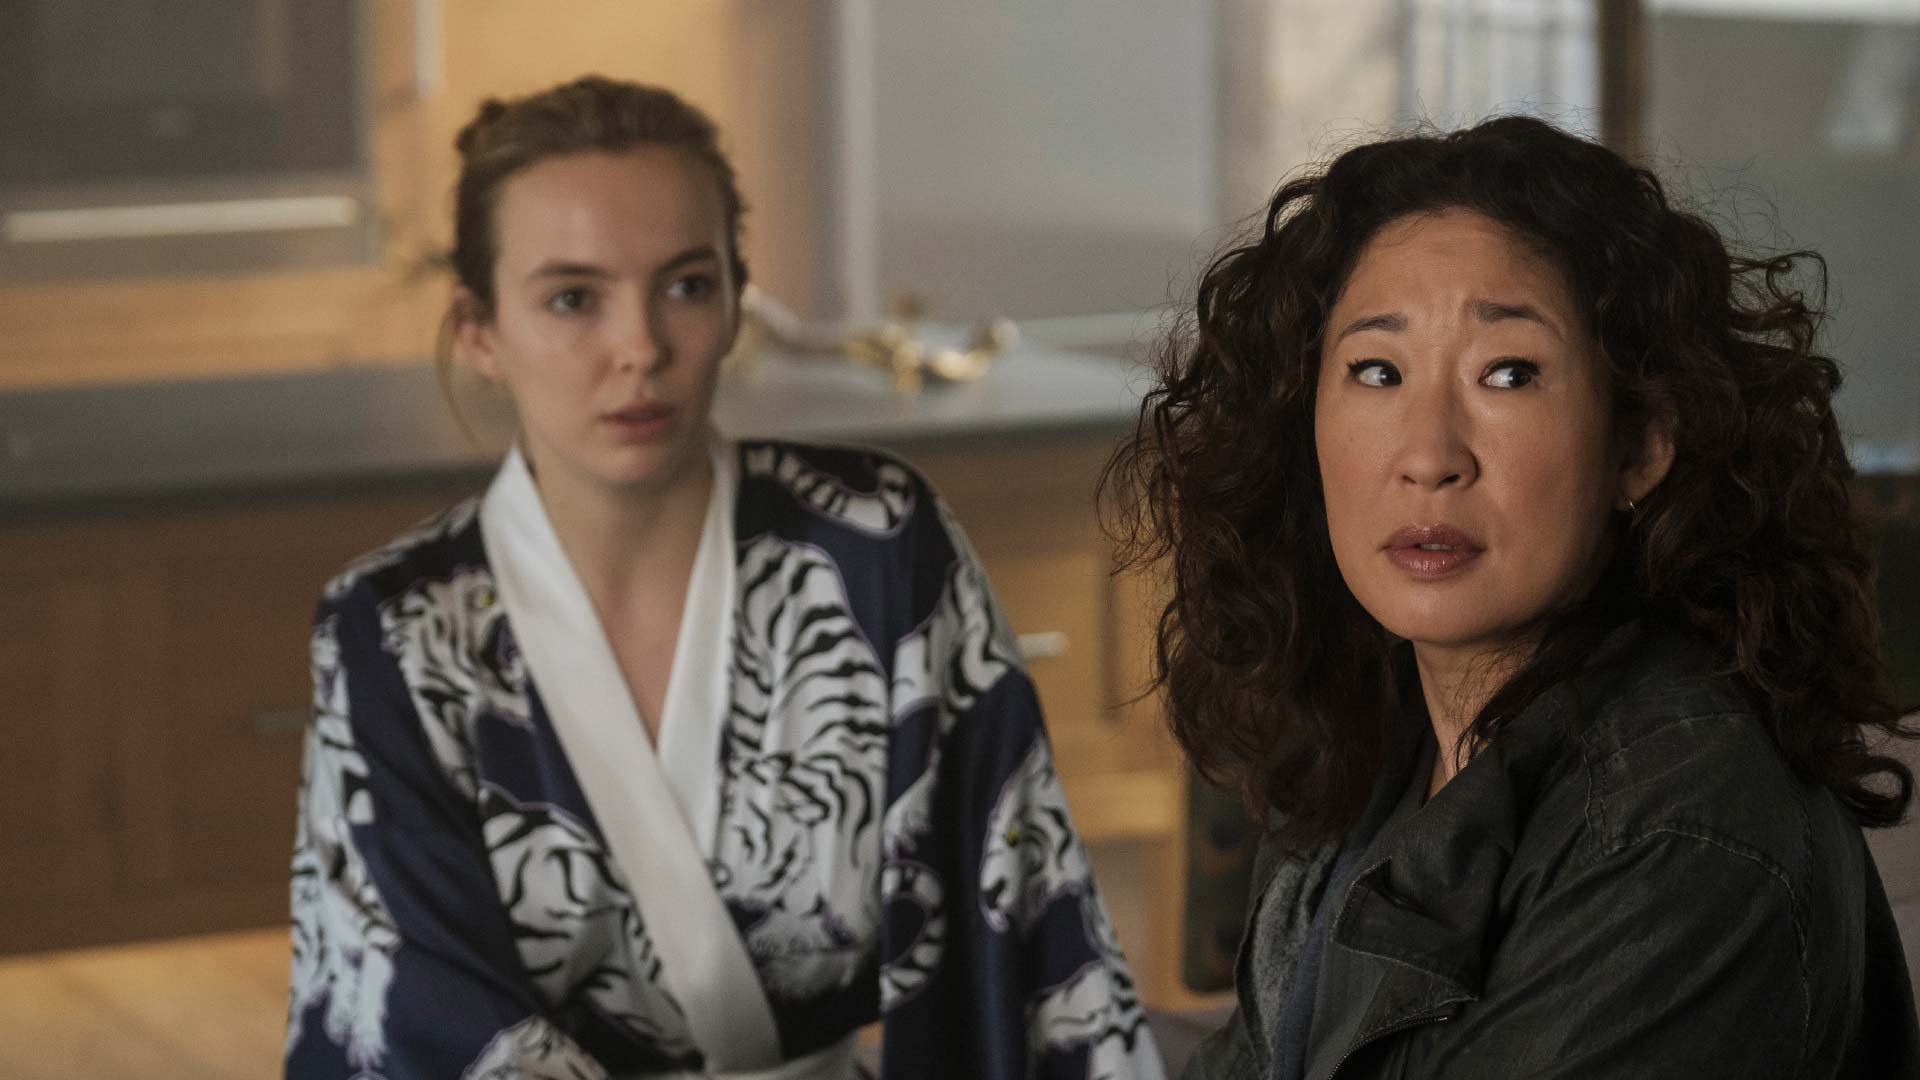 ‘Killing Eve’ Season 3 Arrives Two Weeks EarlyWatch The New Trailer Now!